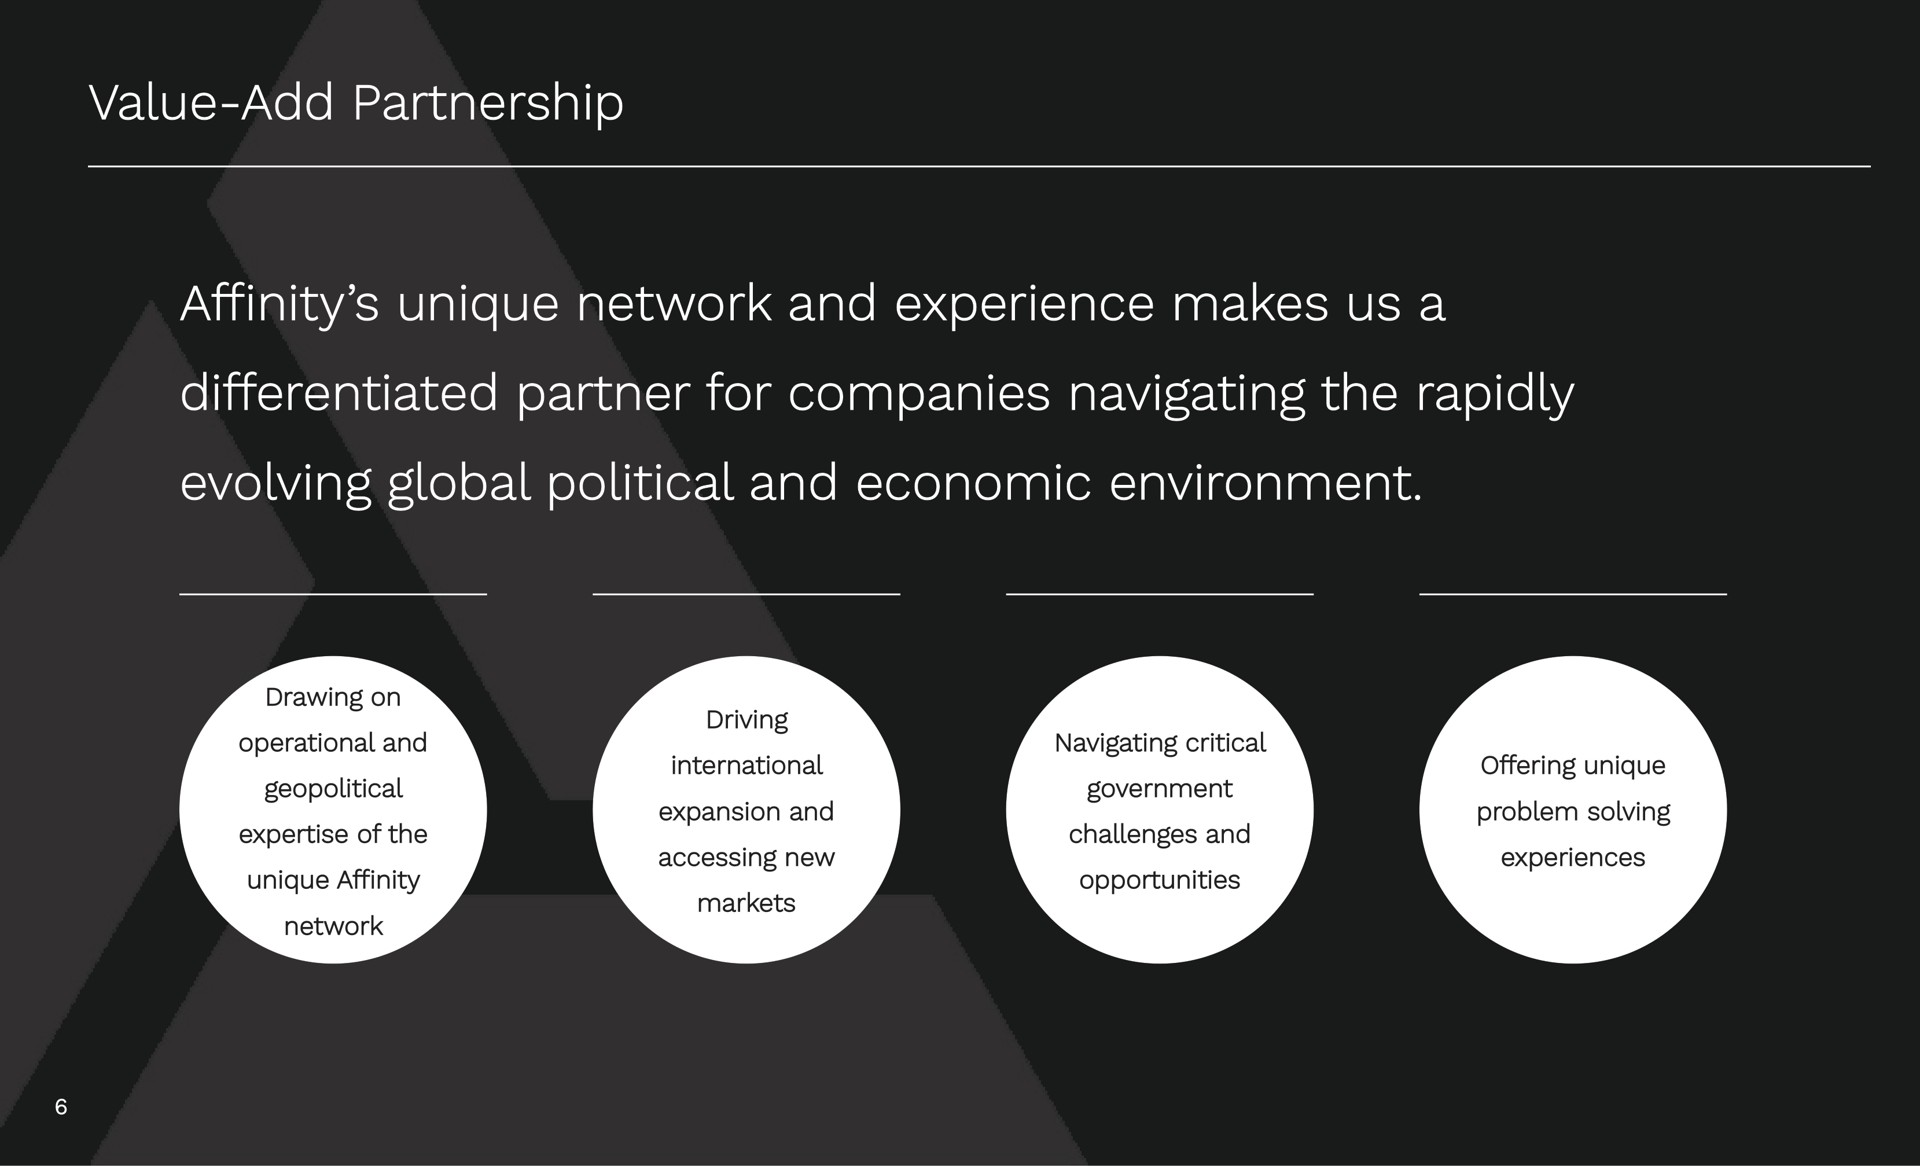 value add partnership value add partnership affinity unique network and experience makes us a affinity unique network and experience makes us a differentiated partner for companies navigating the rapidly differentiated partner for companies navigating the rapidly evolving global political and economic environment evolving global political and economic environment | Affinity Partners